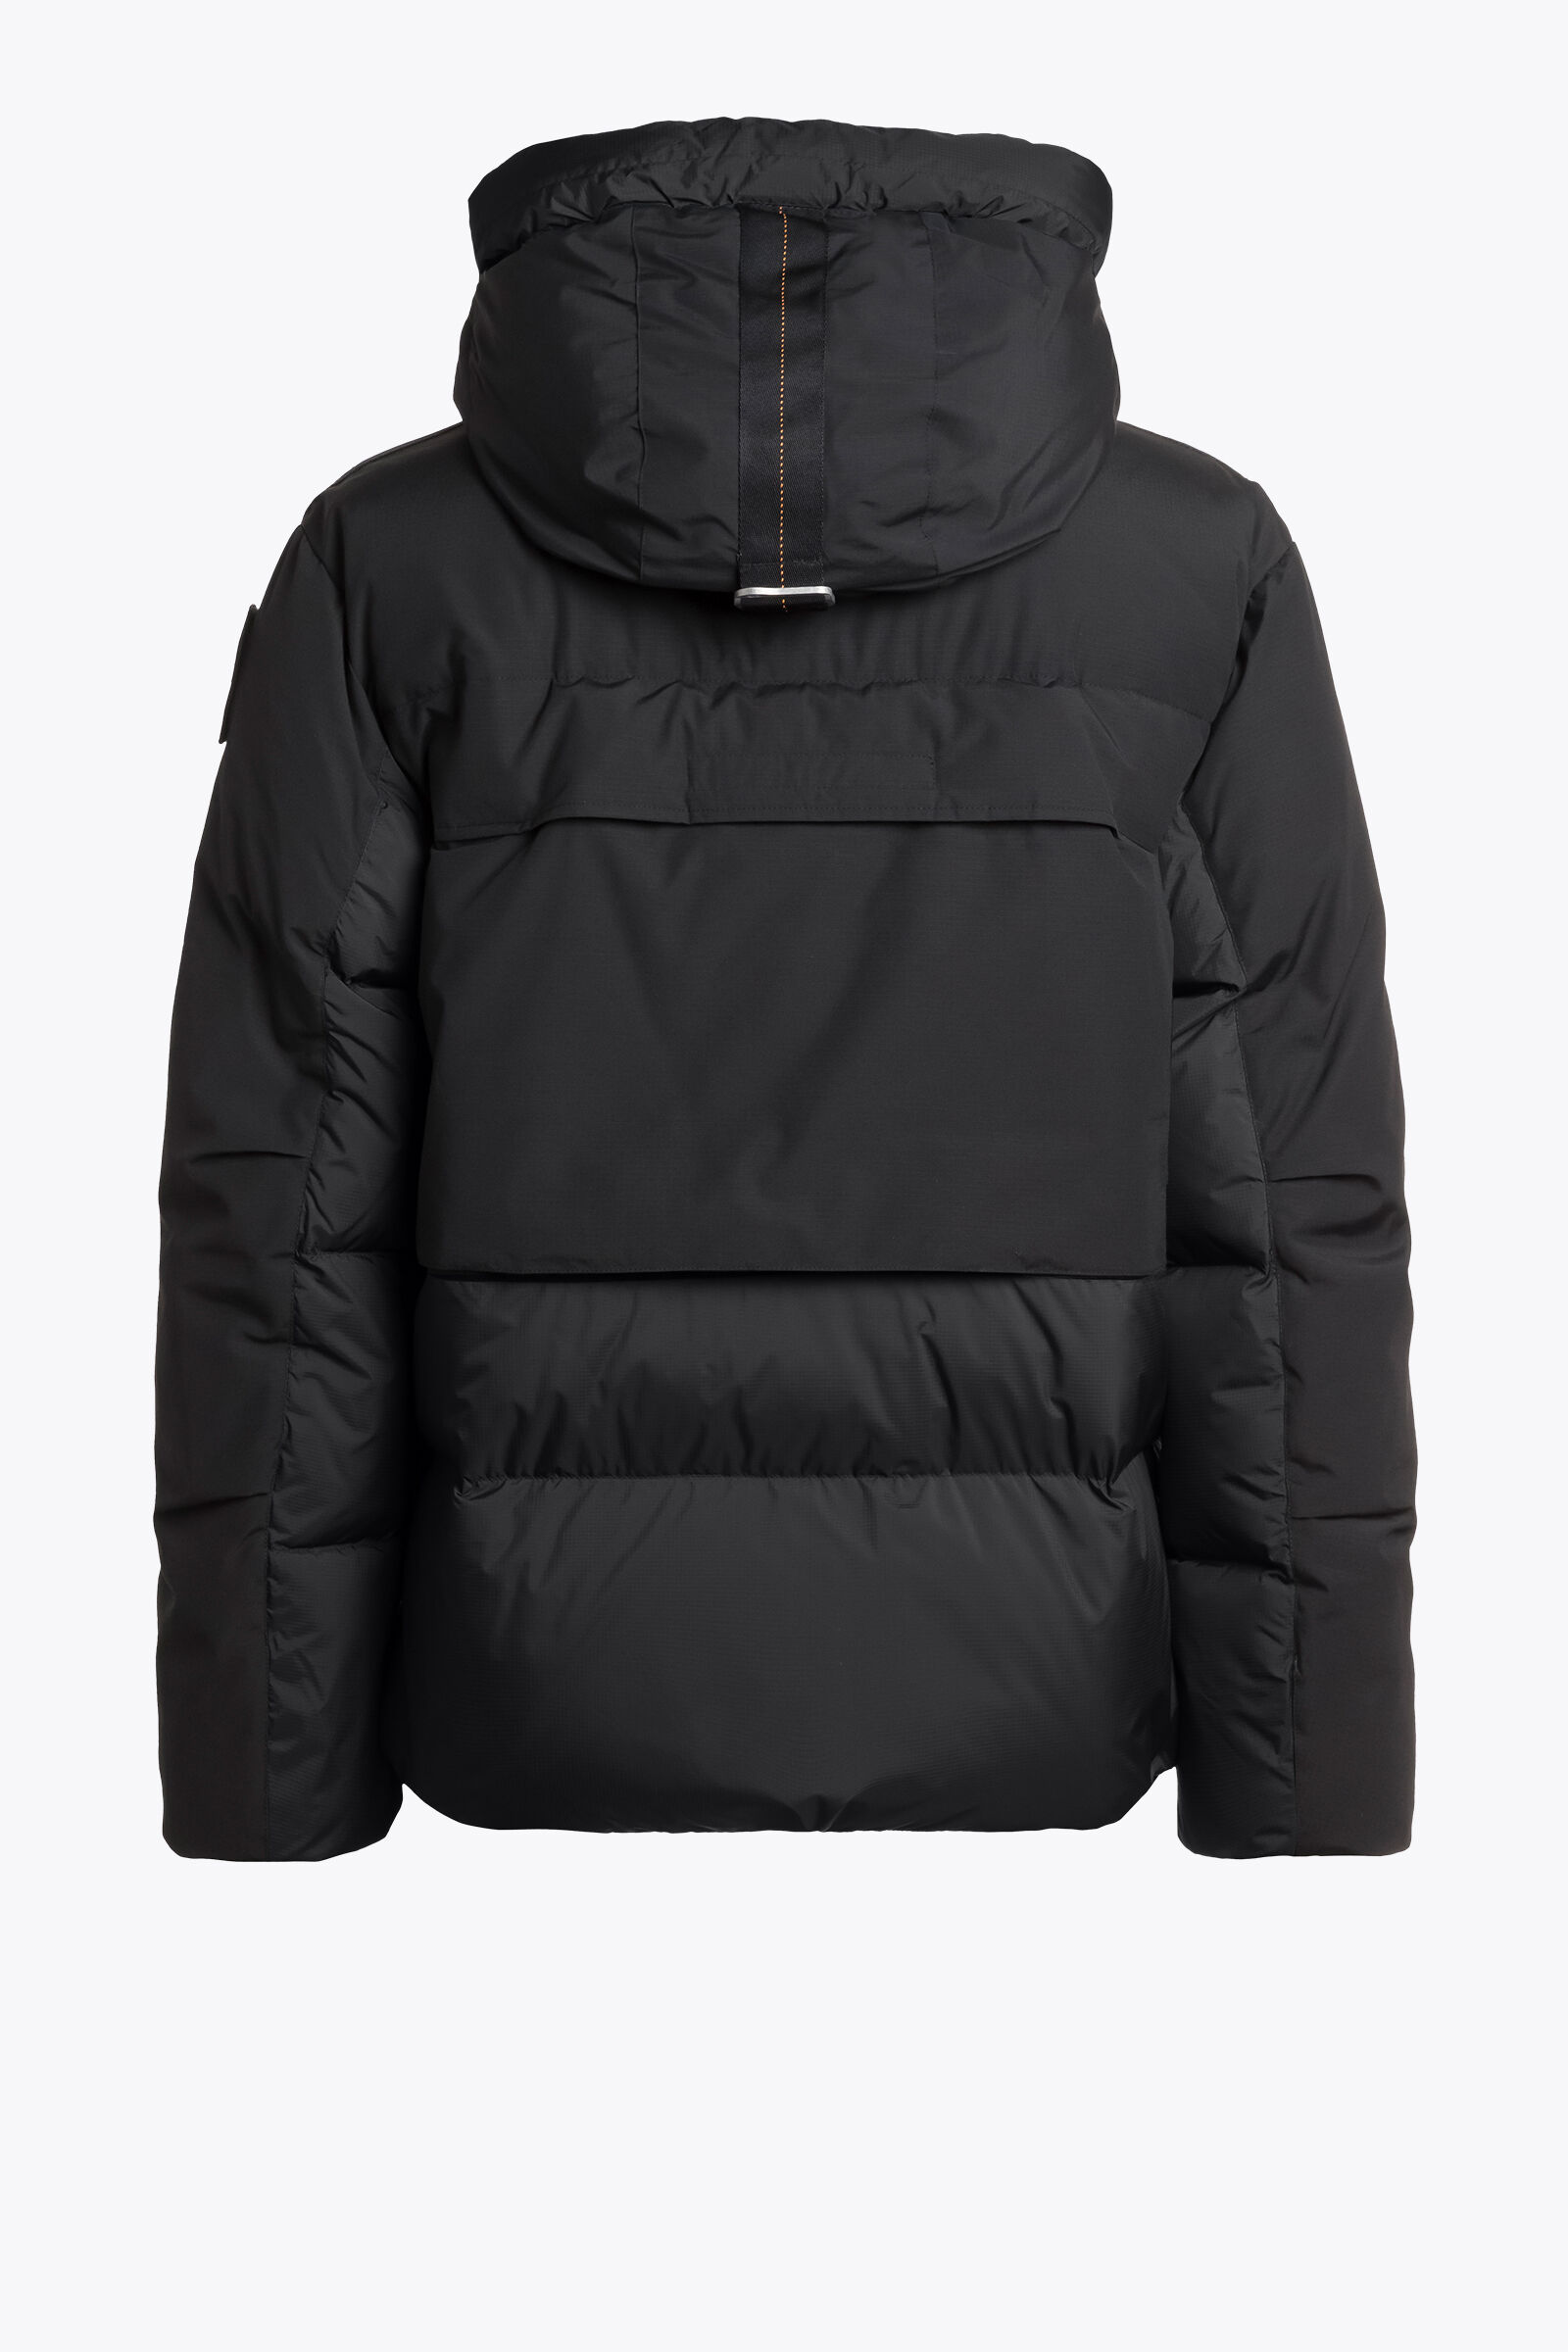 RONIN Short Jackets in BLACK | Parajumpers®